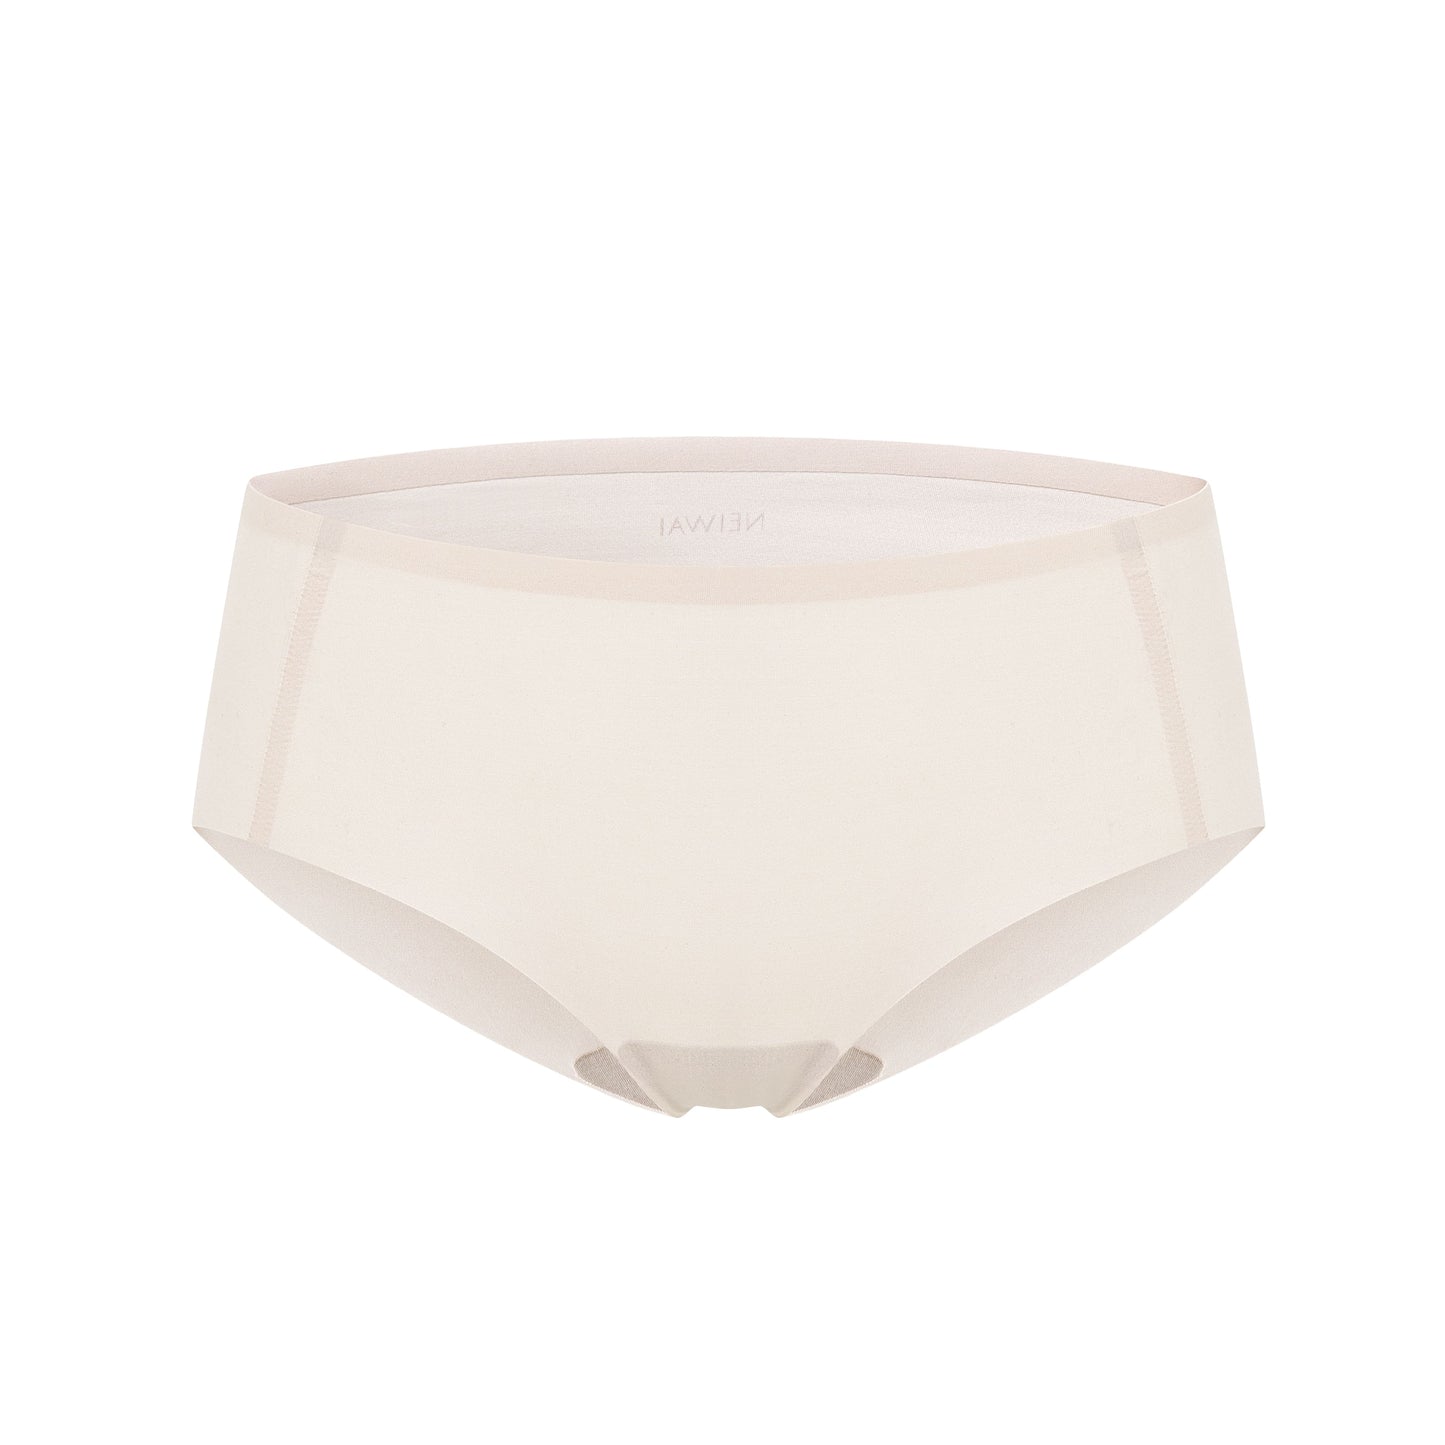 Fat lay image of off white underwear